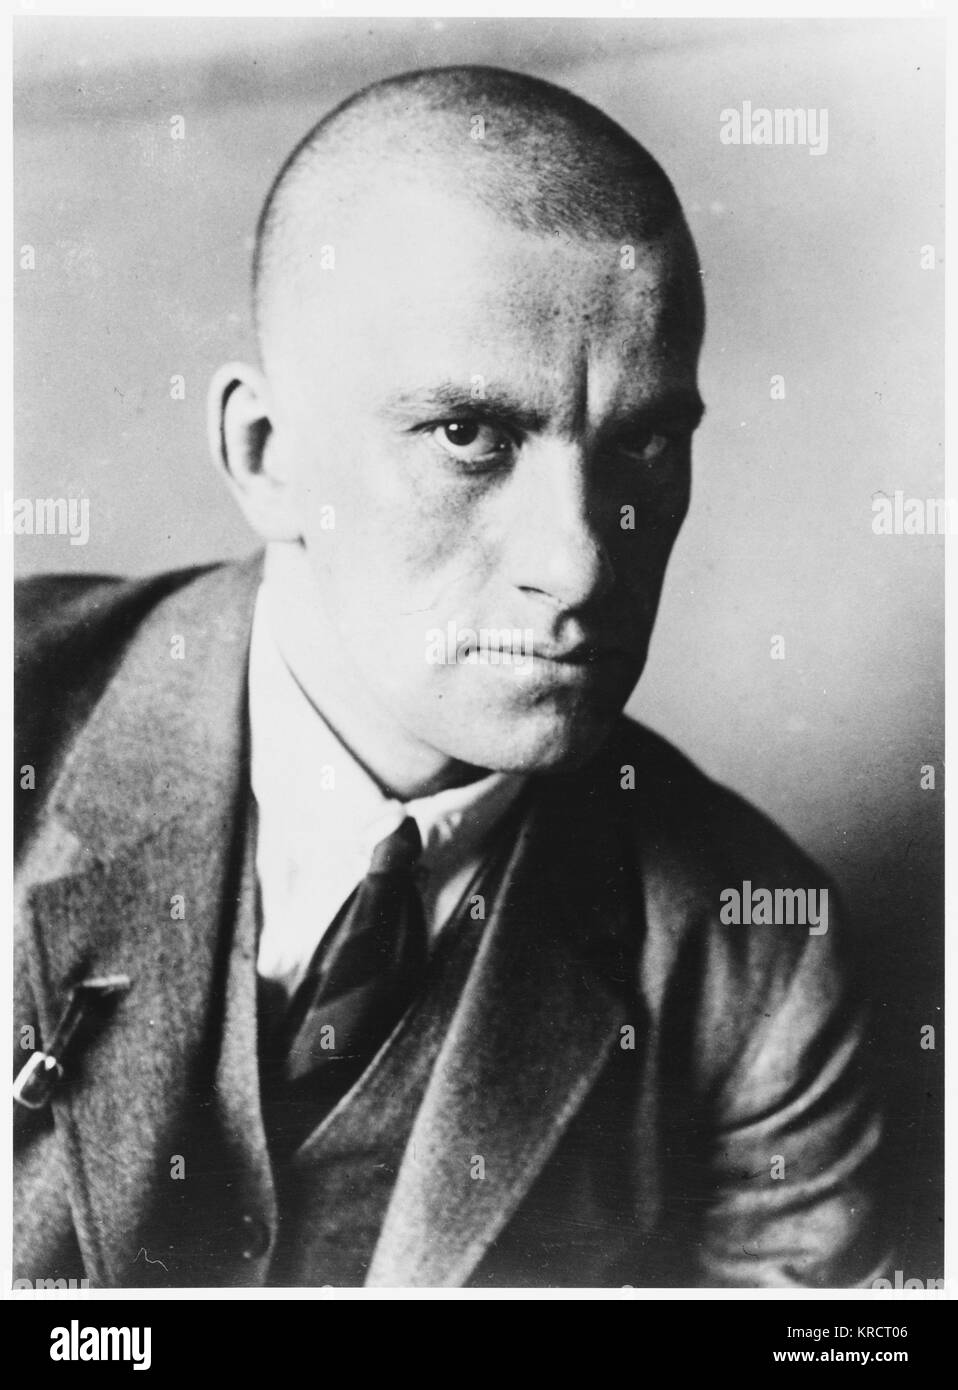 VLADIMIR MAYAKOVSKY - Russian poet and supporter of the Communist party in Russia (this photograph is dated 1927) Date: 1893 - 1930 Stock Photo